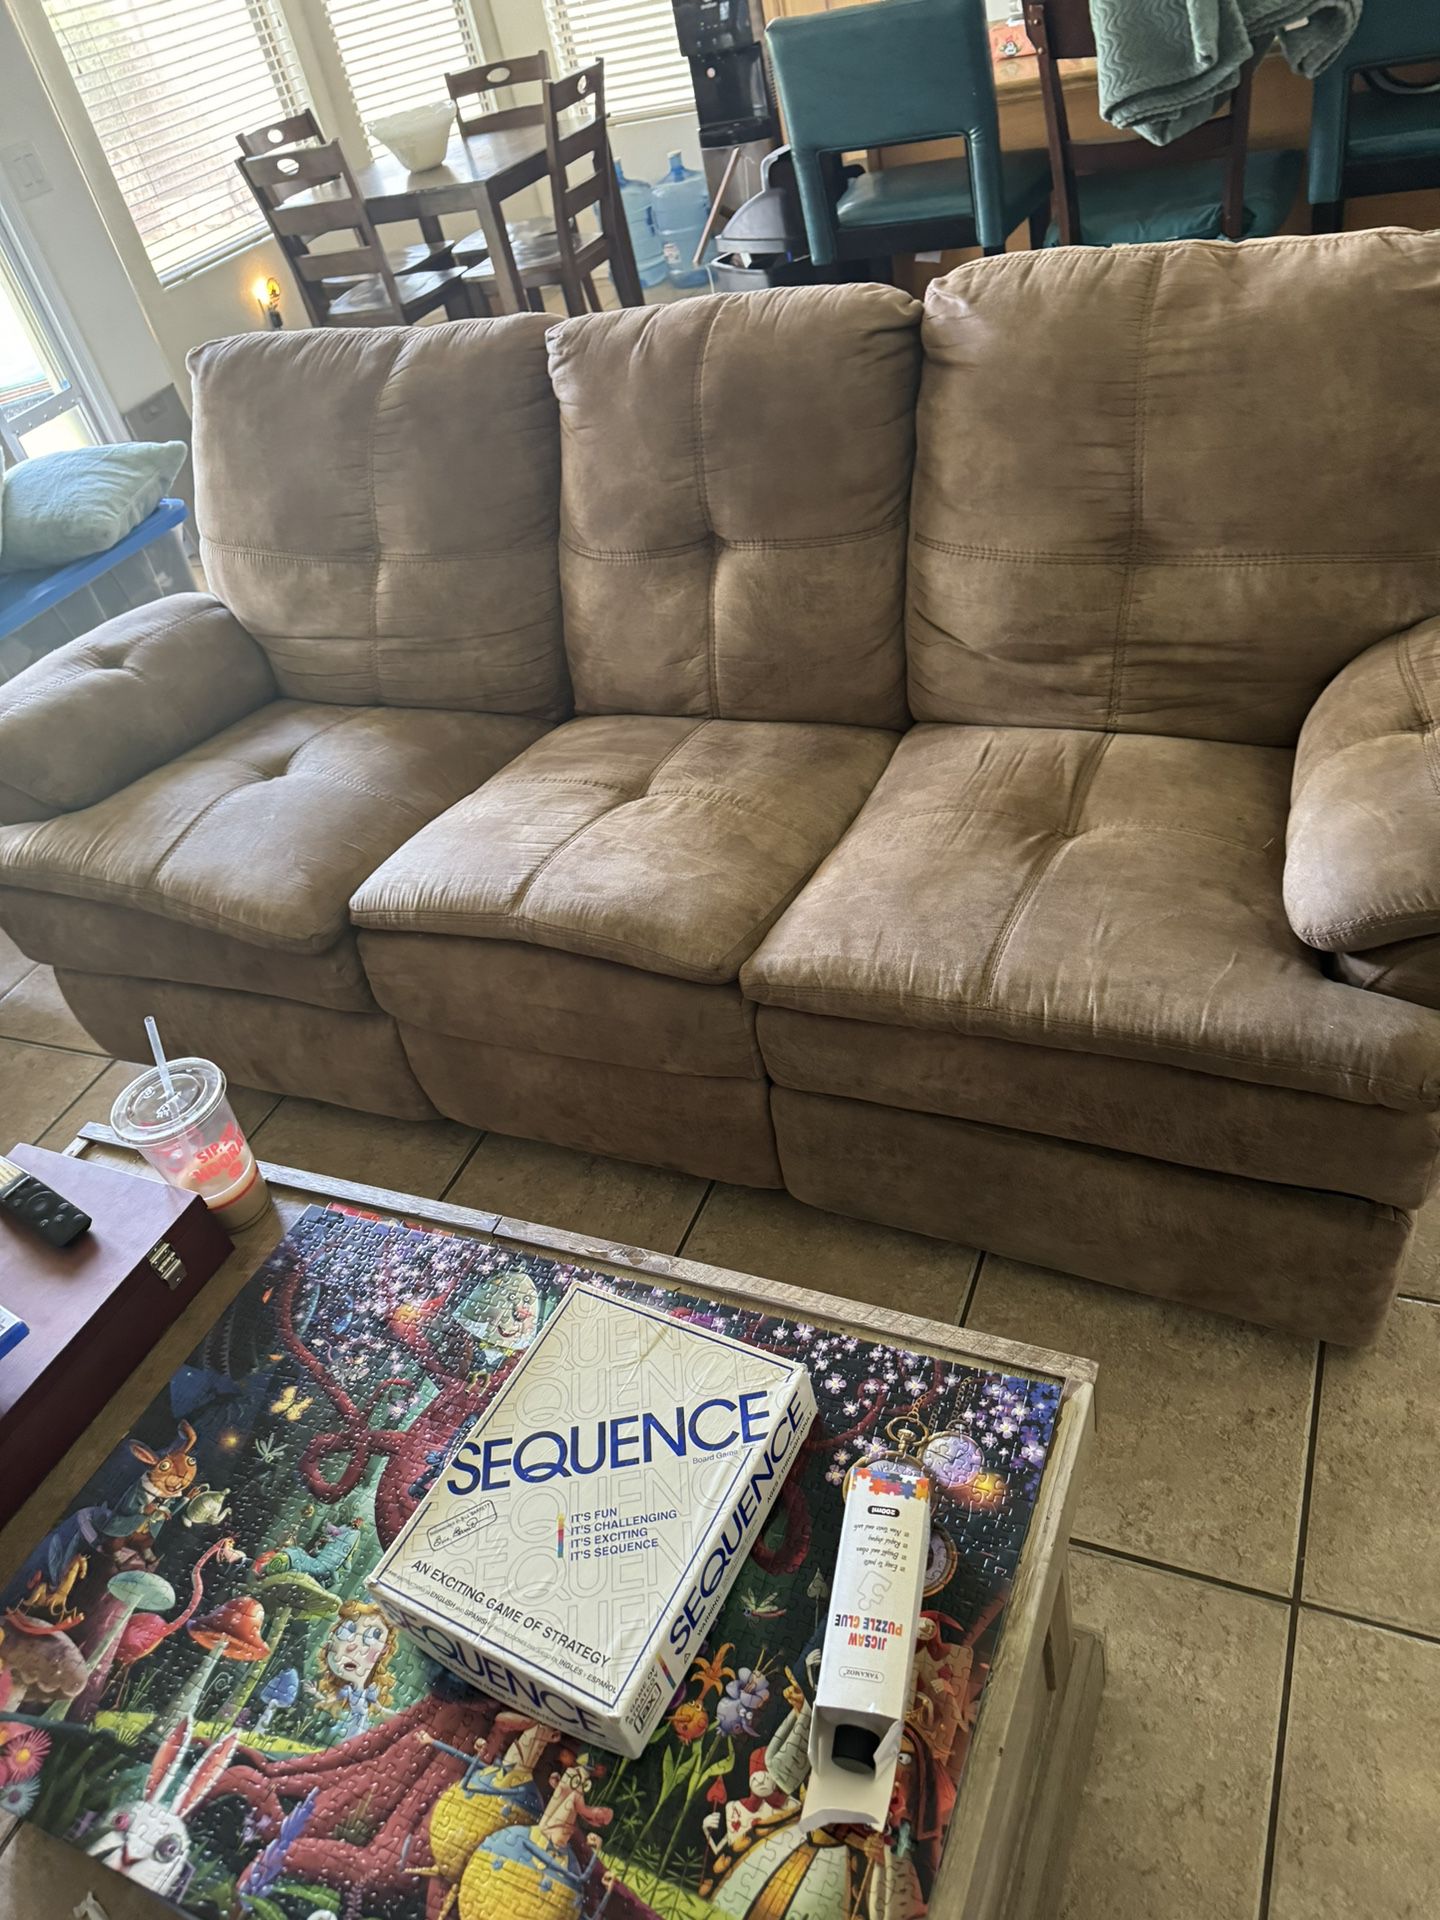 2 Couches For $125 Total 